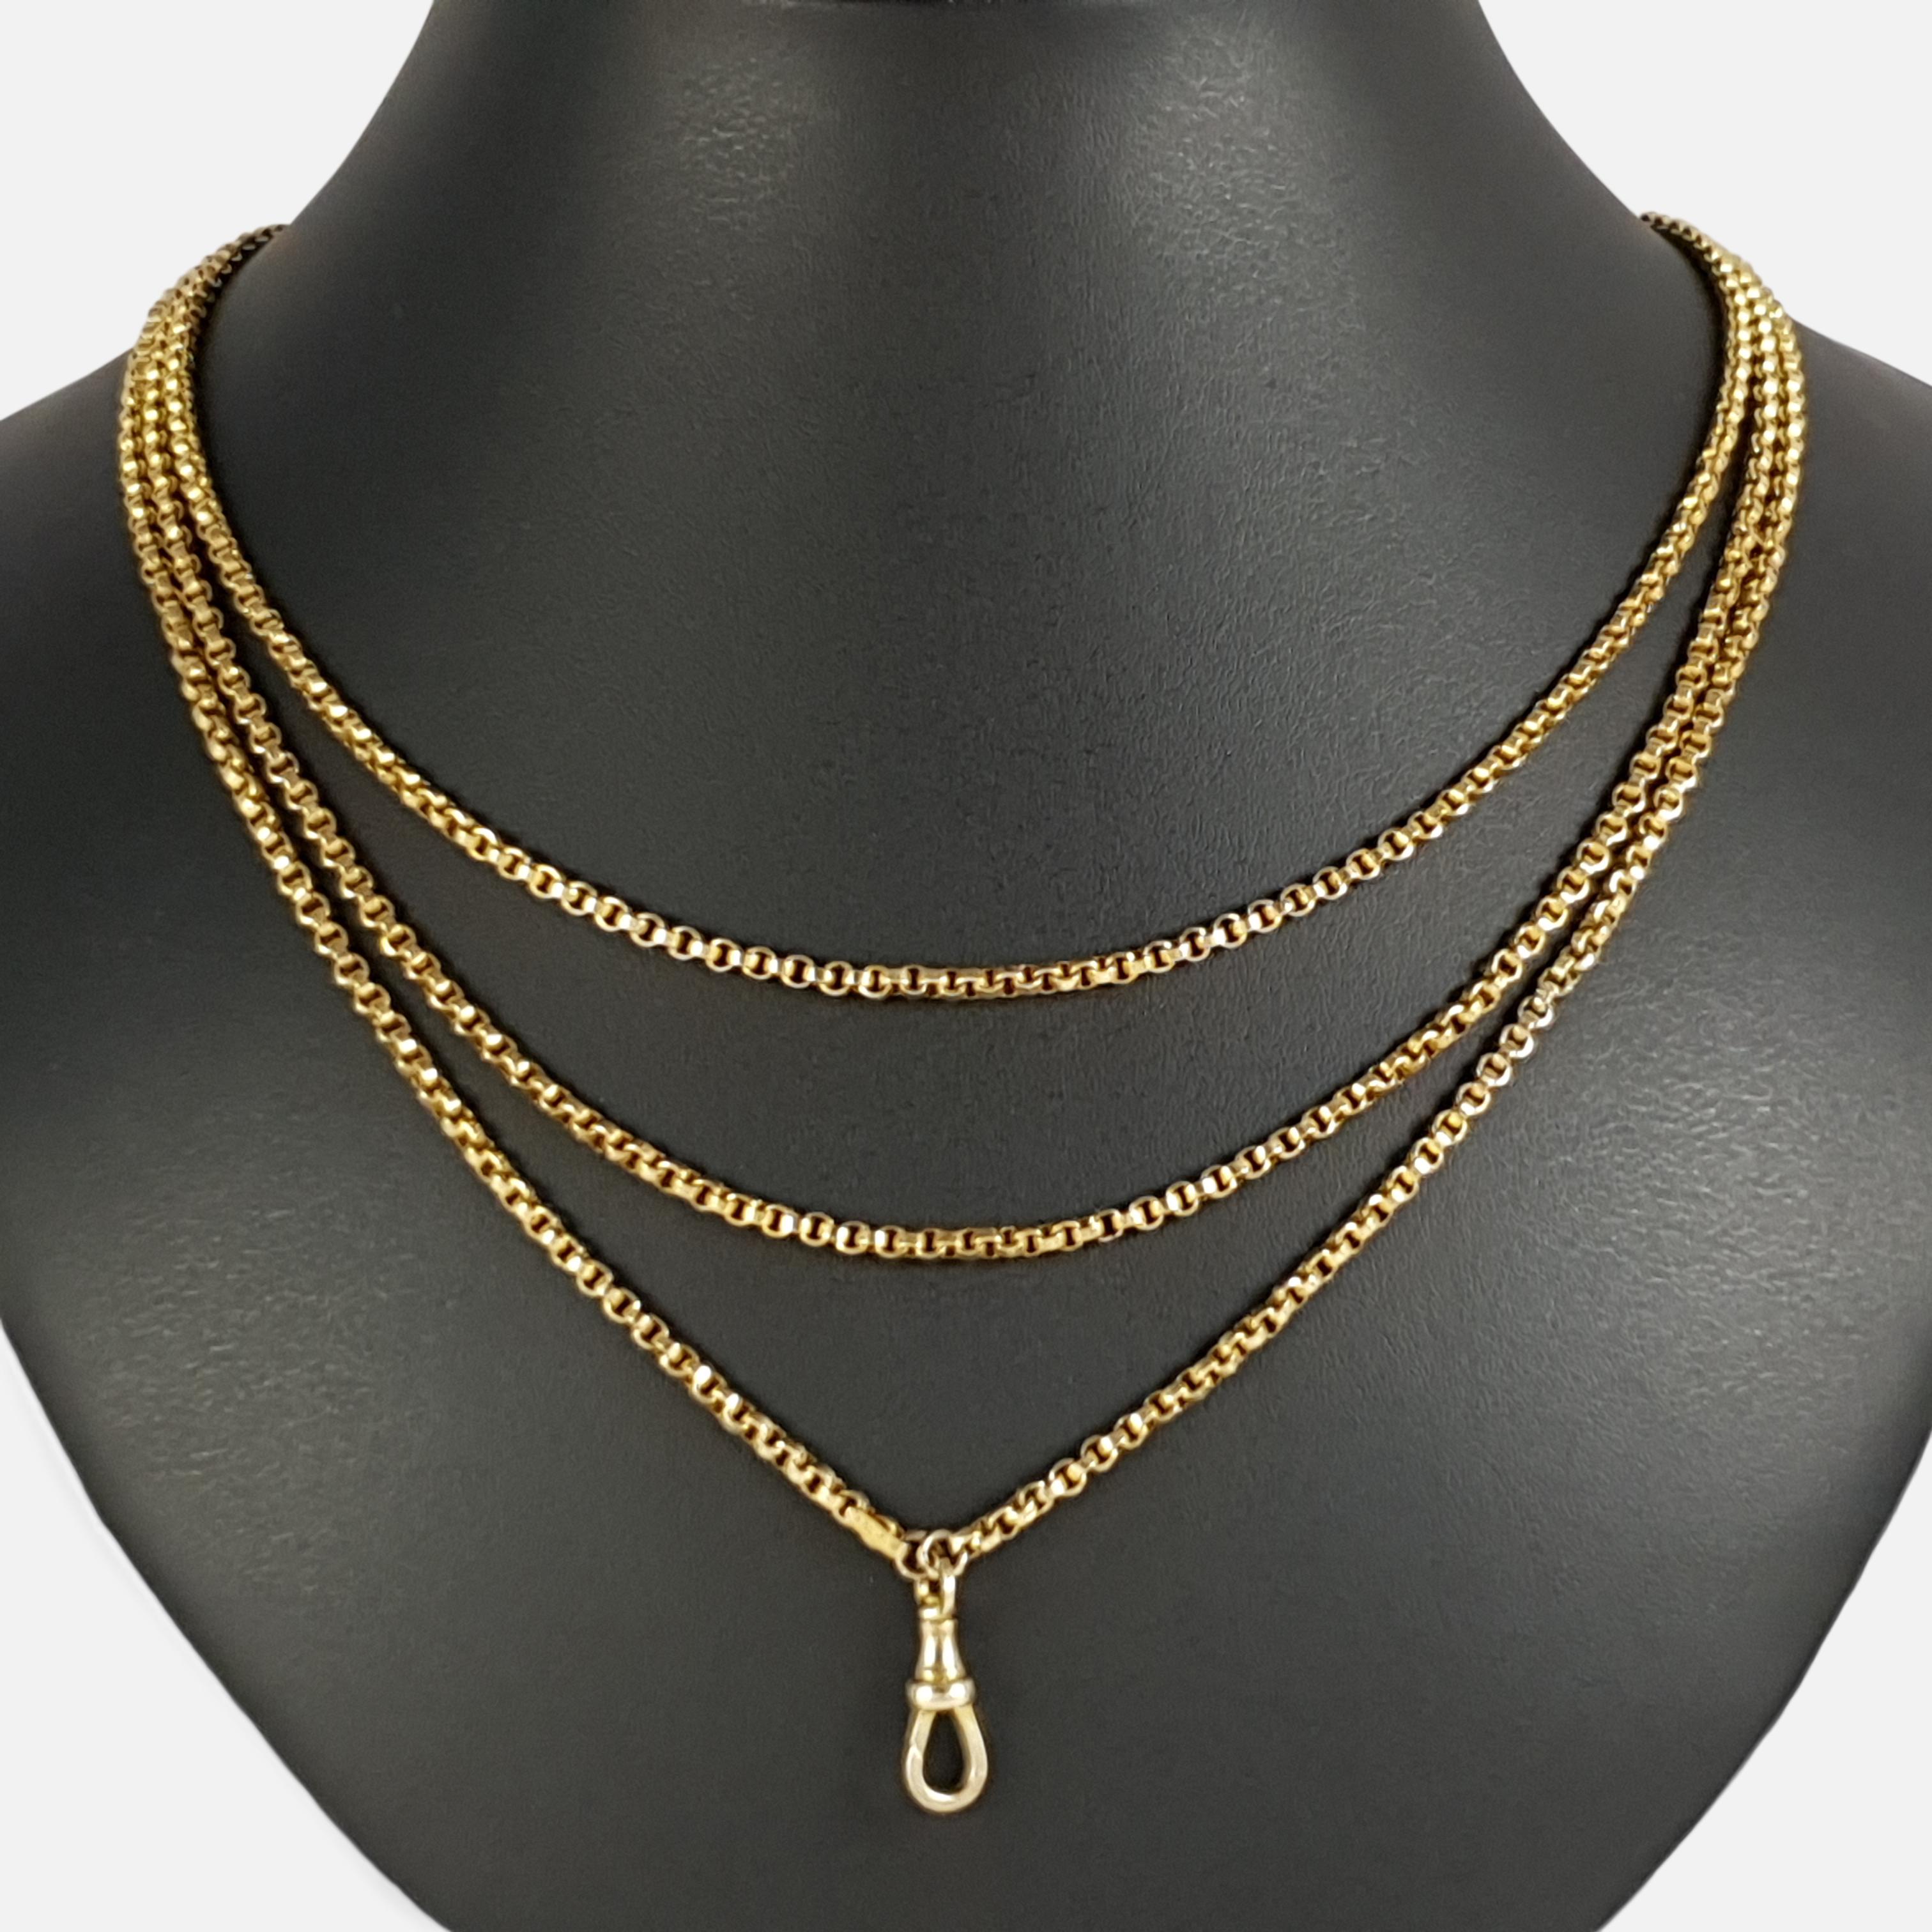 Description: - This is a superb antique Victorian 9 karat yellow gold long guard muff chain with associated dog clip. The chain is tagged '9C J.M'.

Date: - Circa 1890.

Measurement: - The chain measures approximately 60 1/8 inches (152.72cm) in